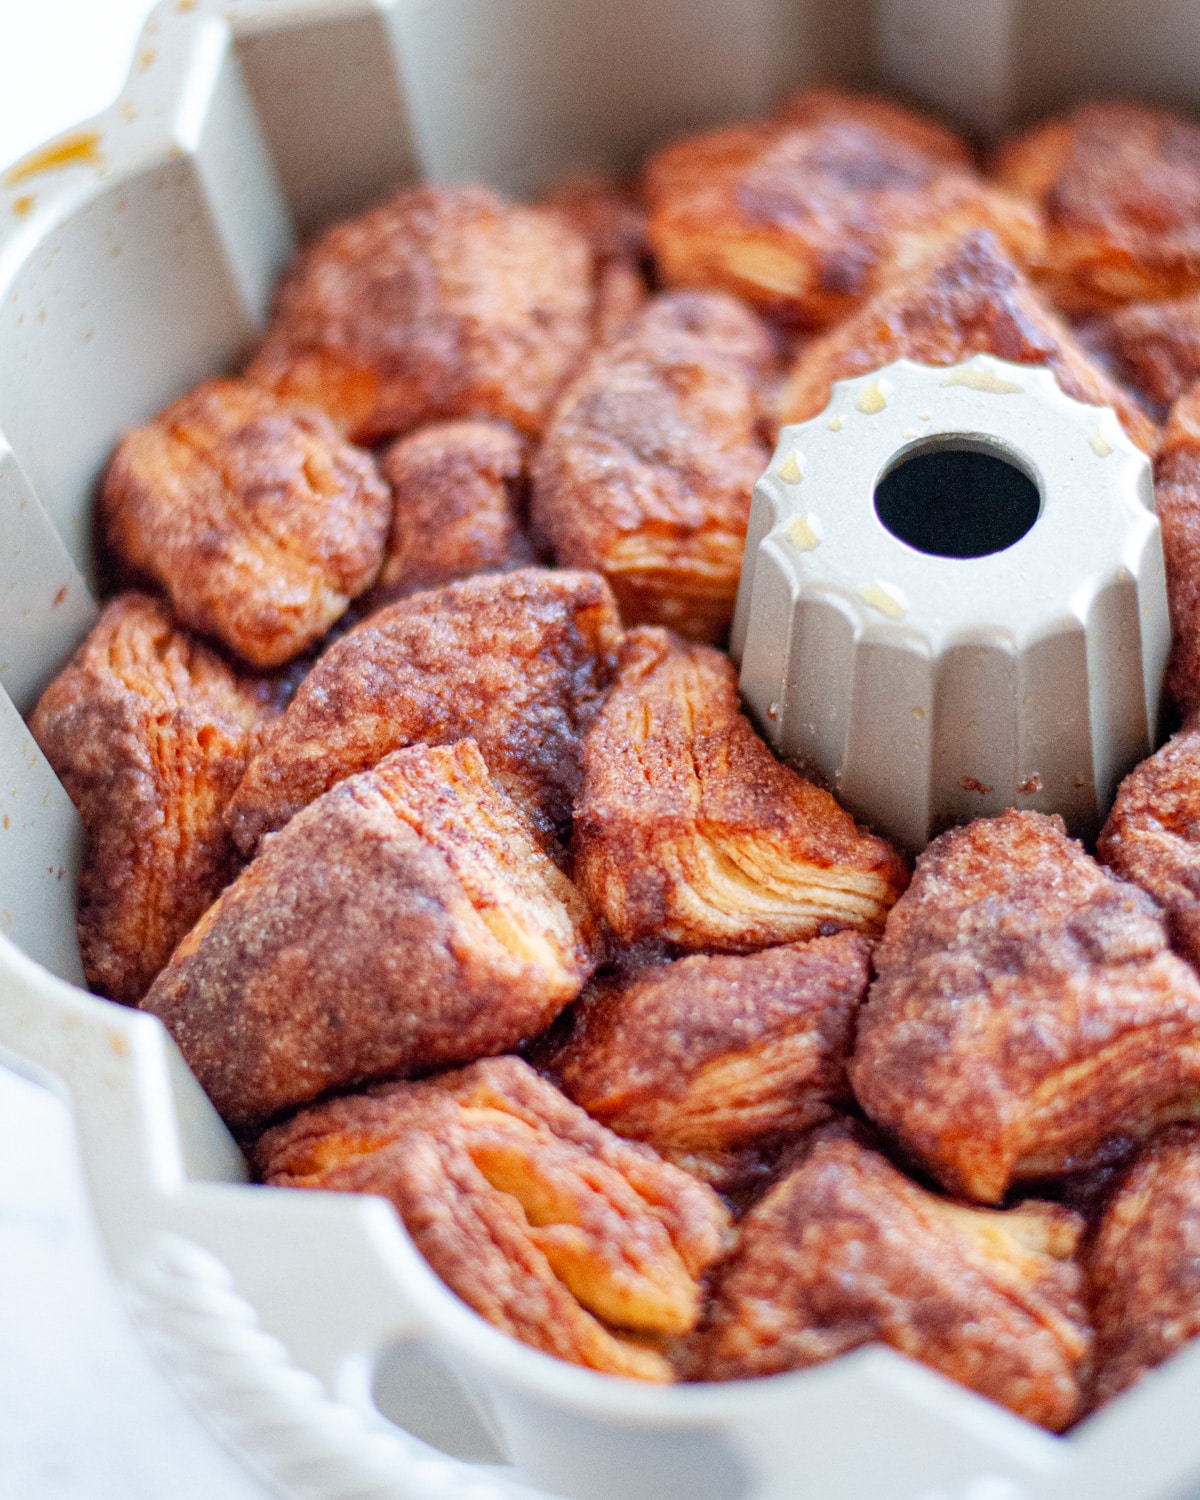 monkey bread fresh out of the oven in a bundt pan. you can see that the biscuits have turned golden brown and the cinnamon-sugar and butter mixture has melted and turned caramely in spots.